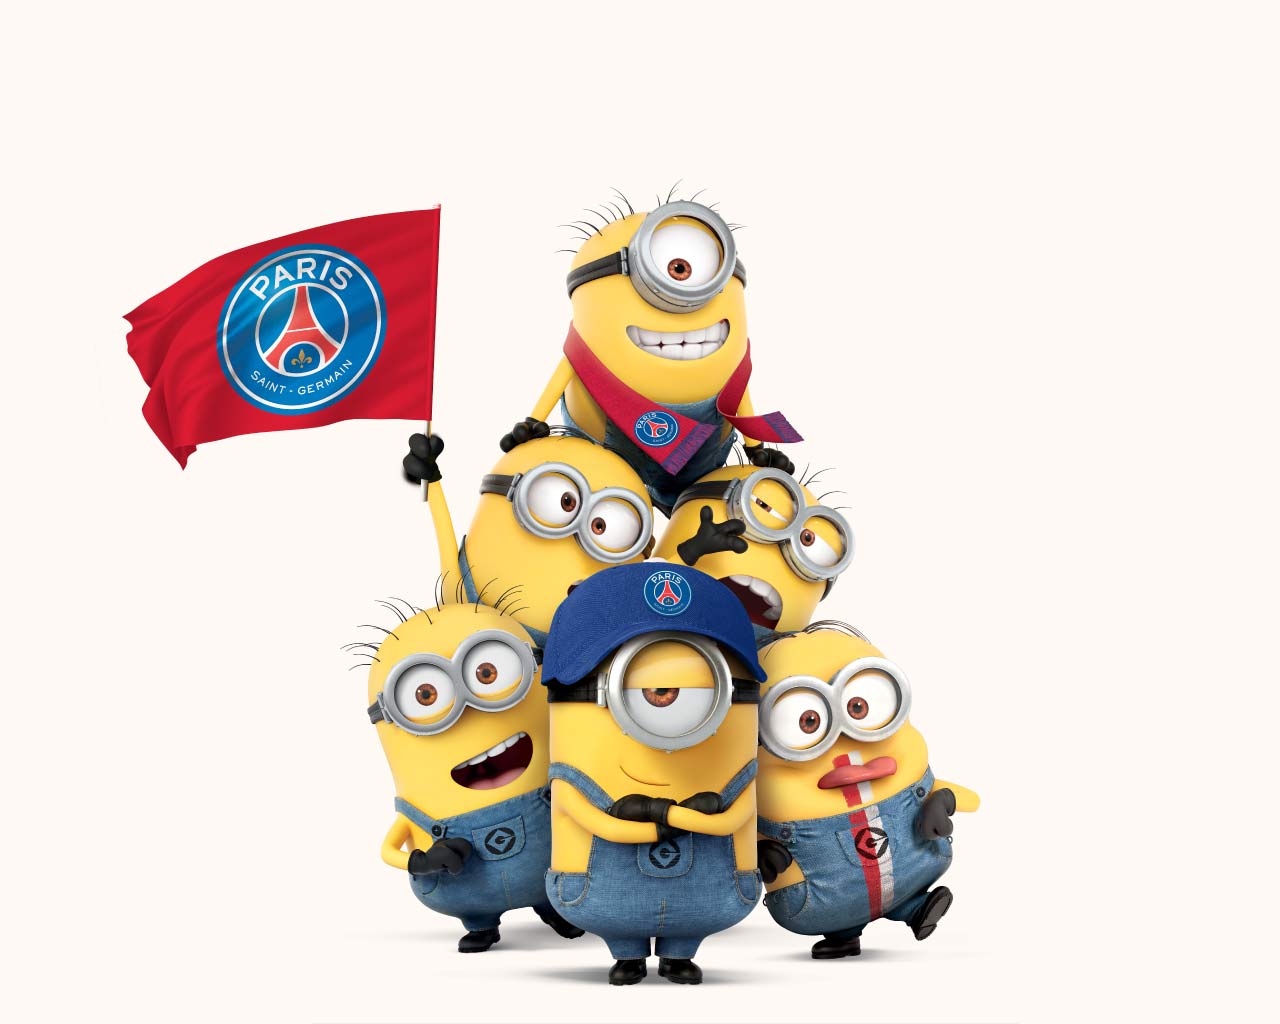 The Minions join forces with Paris Saint-Germain!